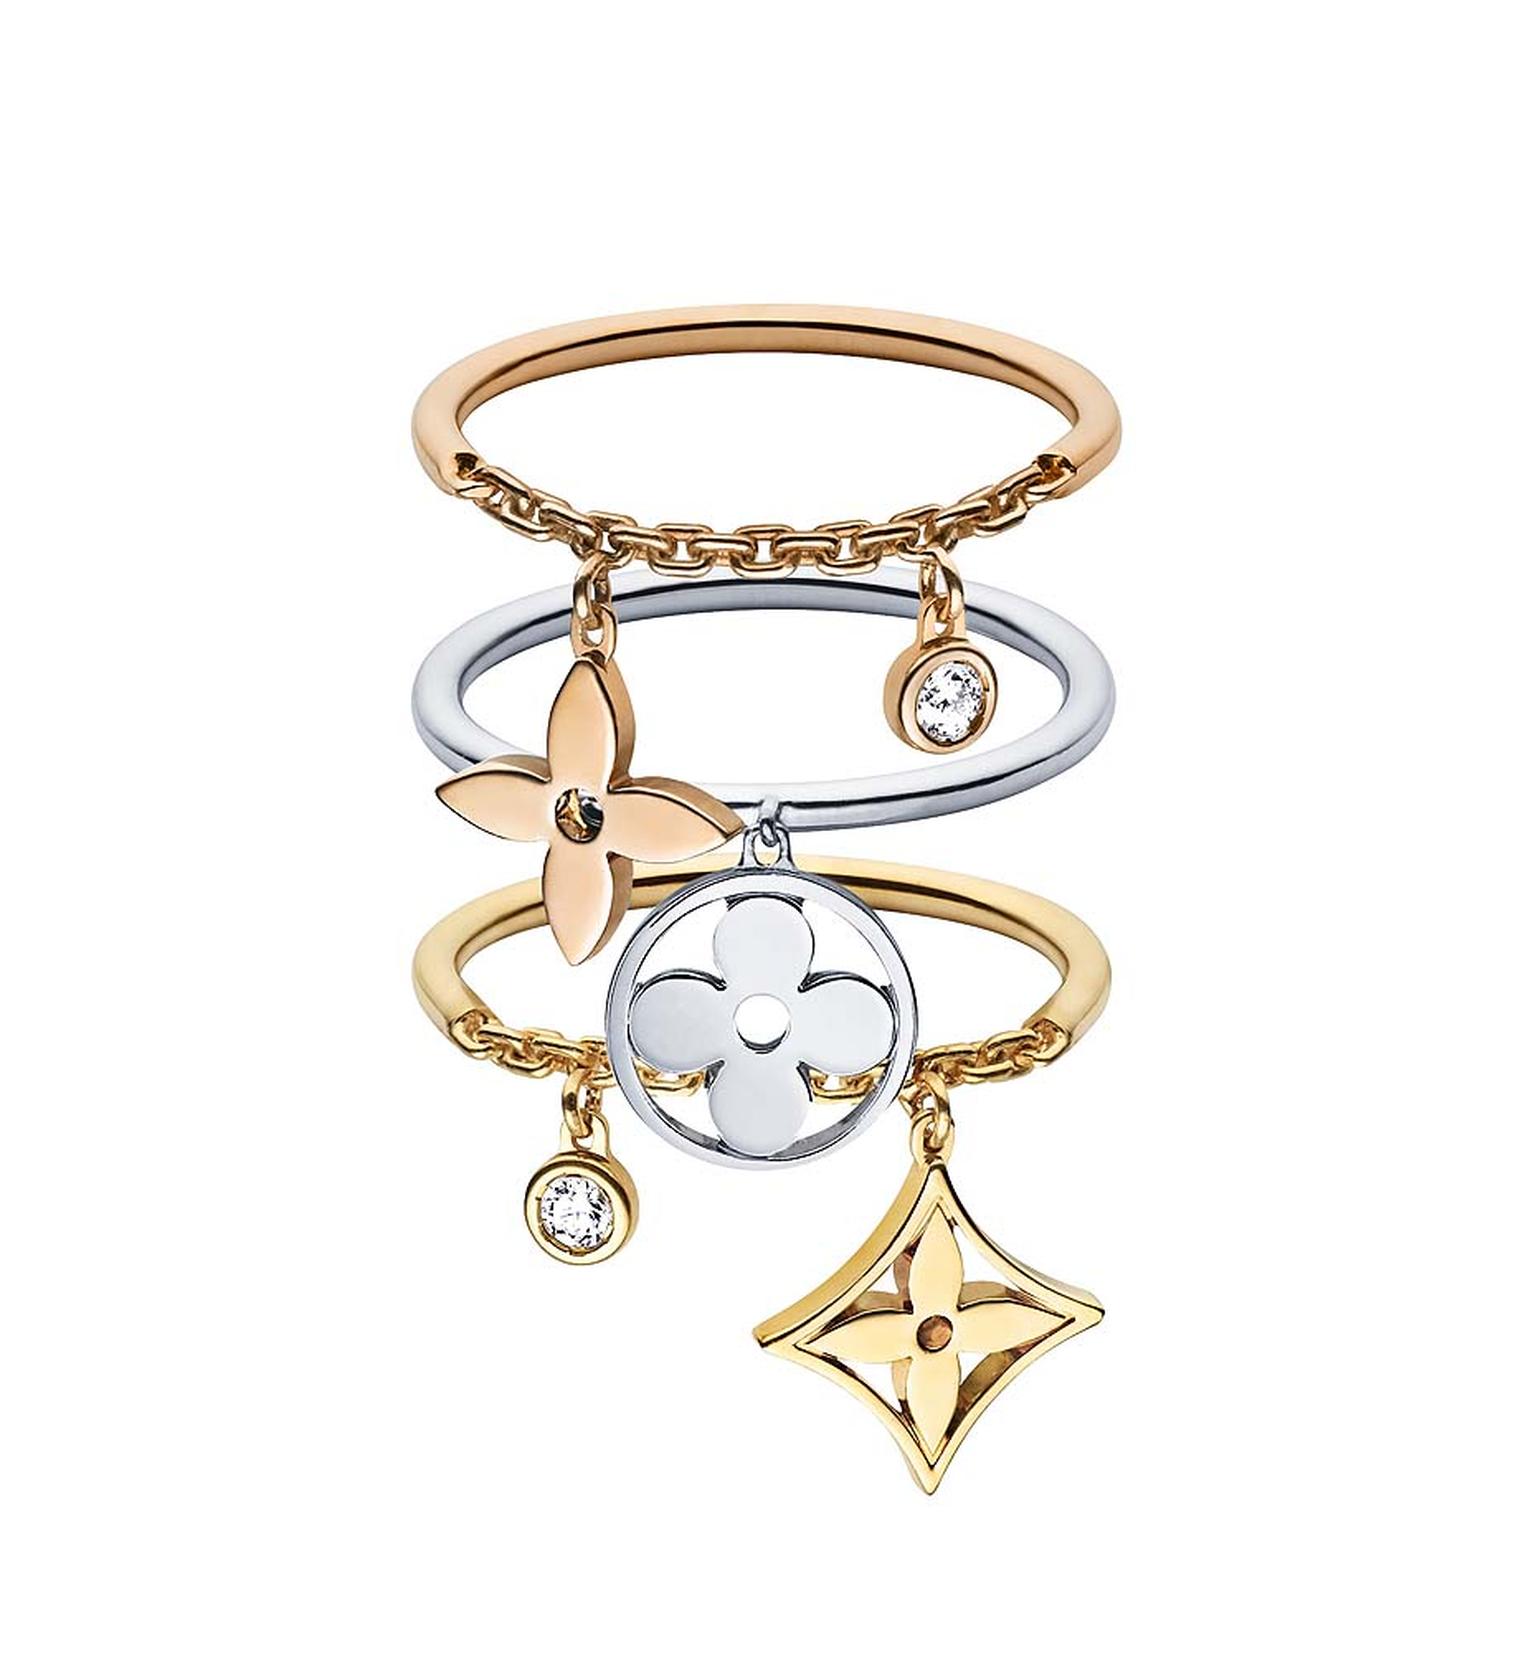 Louis Vuitton's Dangling Variations ring can be worn separately, or stacked together to make more of a statement.